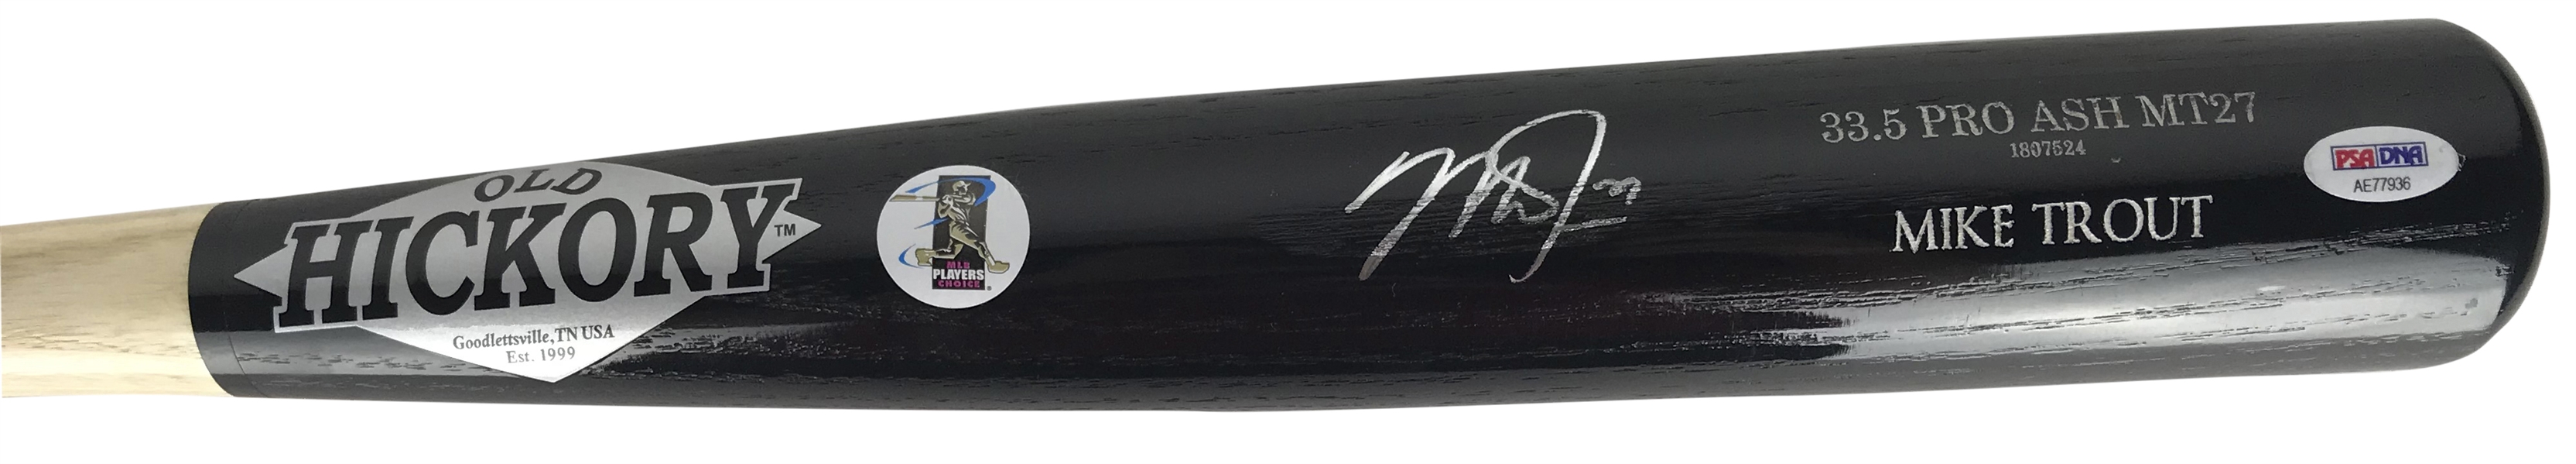 Mike Trout Signed Old Hickory Personal Model Baseball Bat (PSA/DNA)